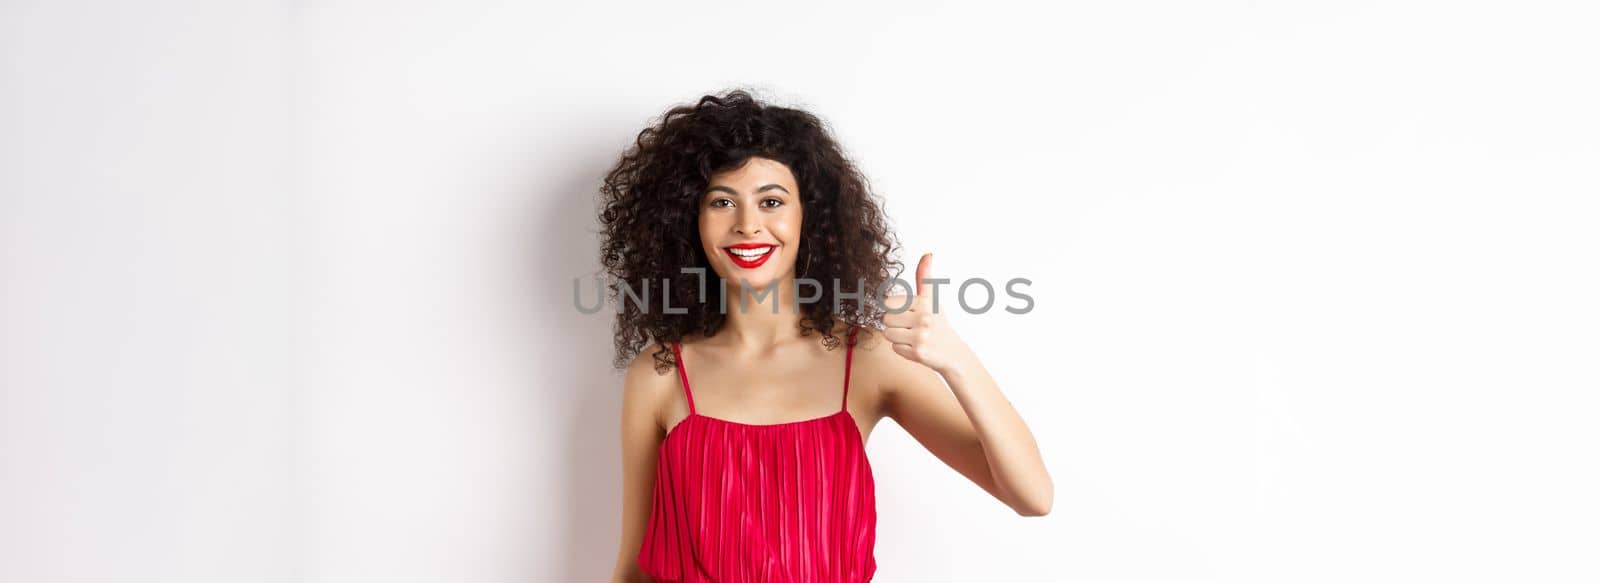 Cheerful woman with red lips and elegant dress, showing thumb up and smiling, recommending product, standing over white background.